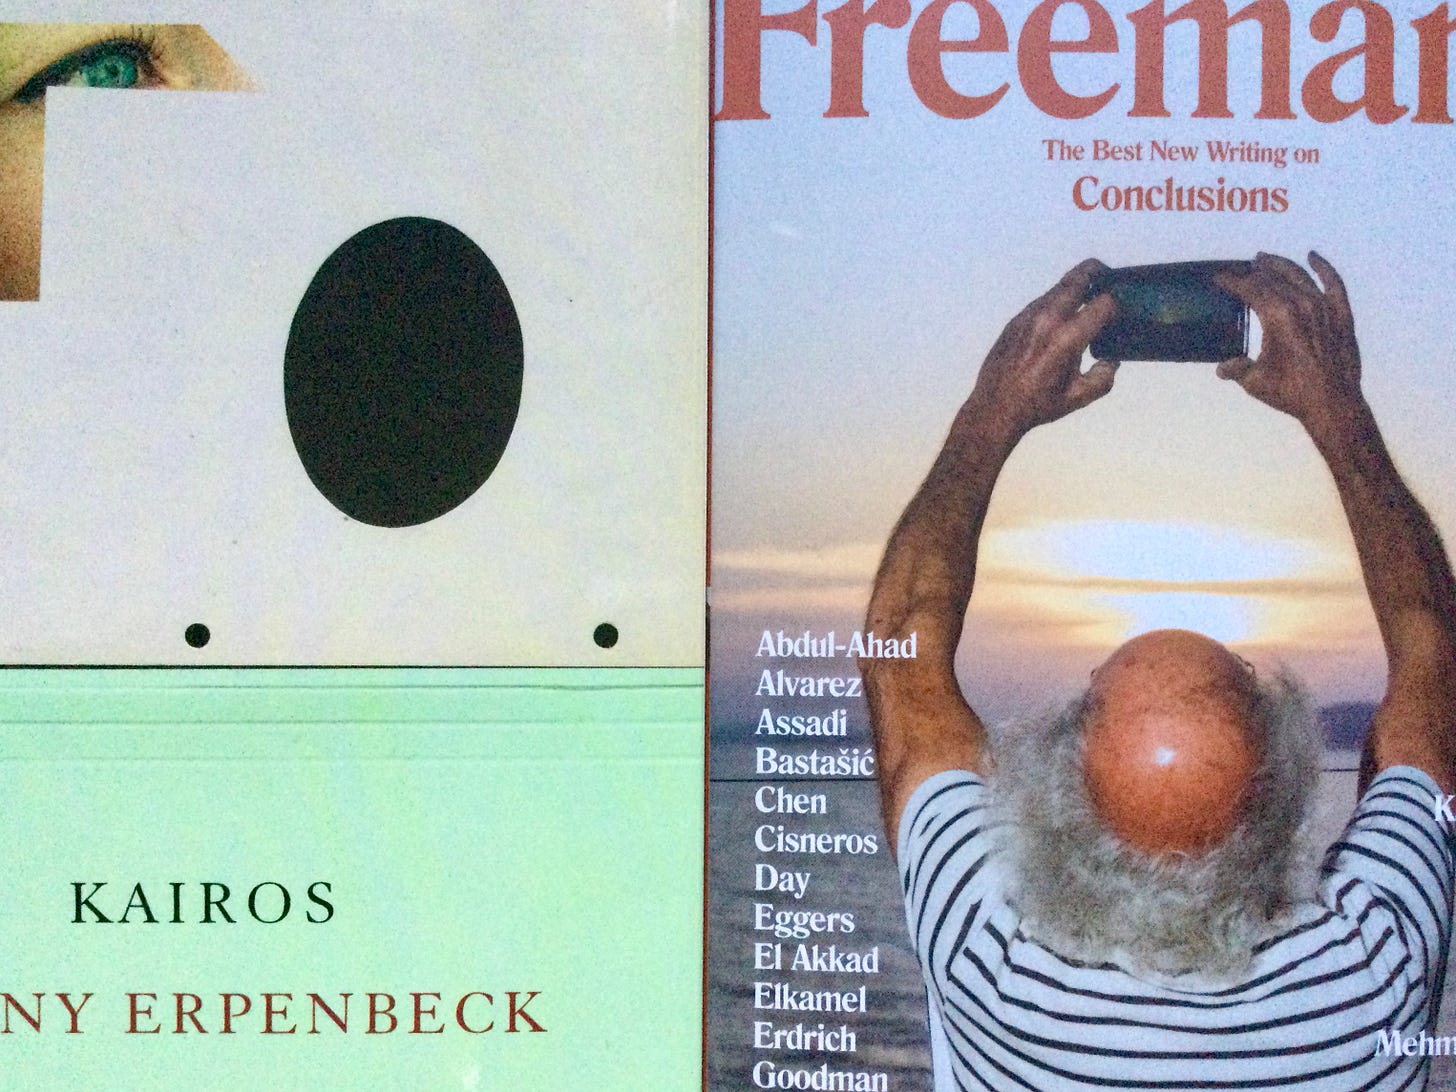 Covers of Kairos and the last issue of Freeman’s 